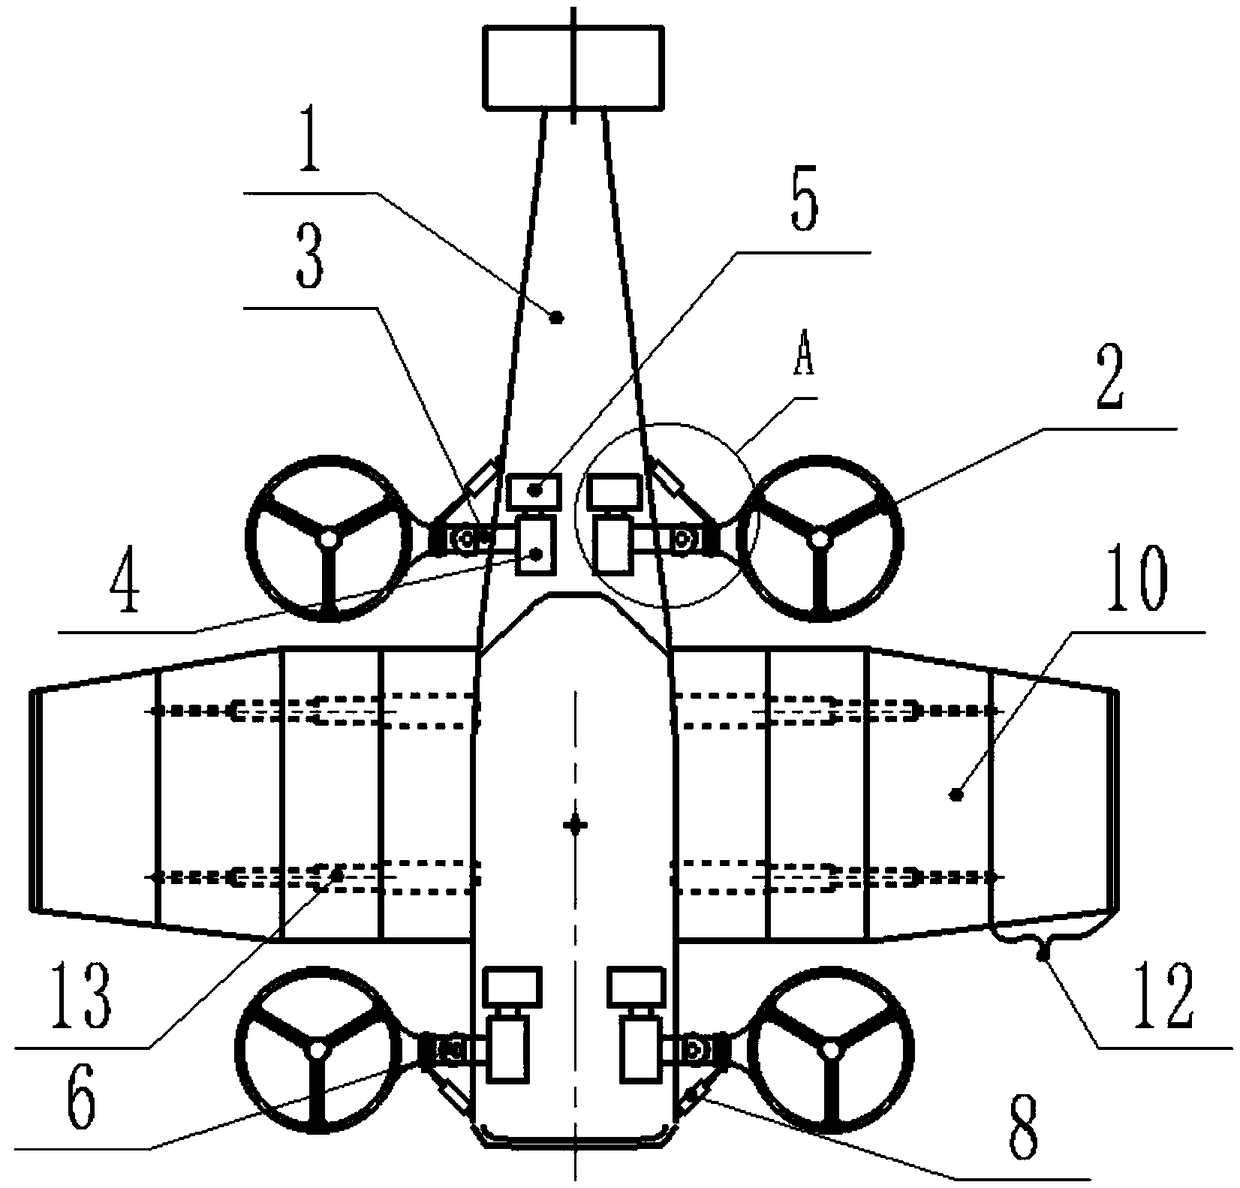 Aircraft system with stretching function